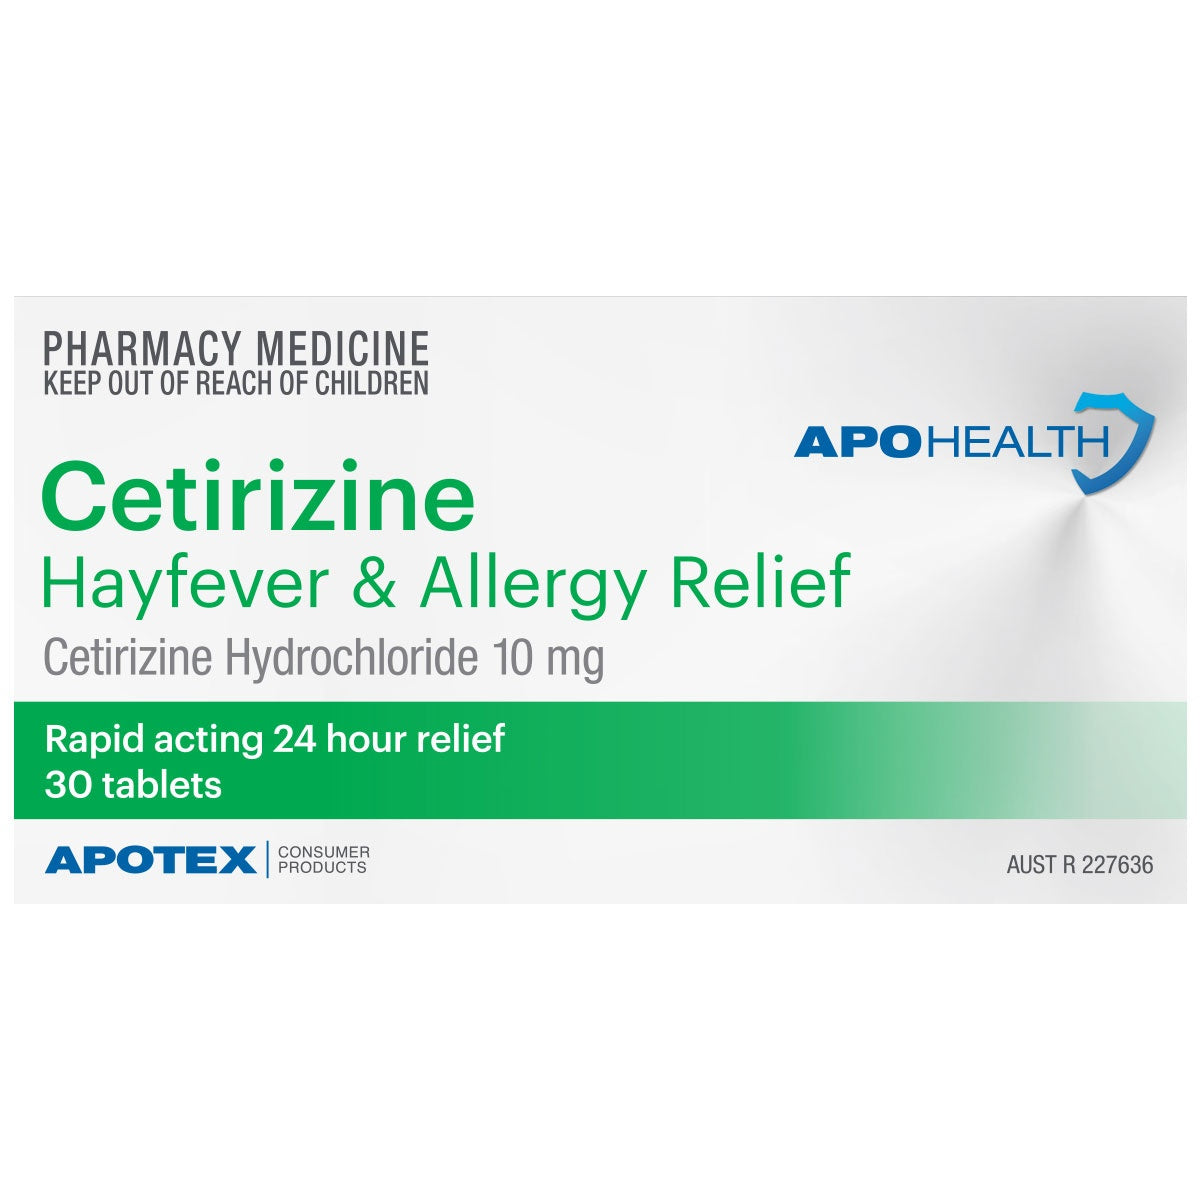 APOHEALTH Cetirizine Hayfever & Allergy Relief 30 Tablets (Limit ONE per Order)